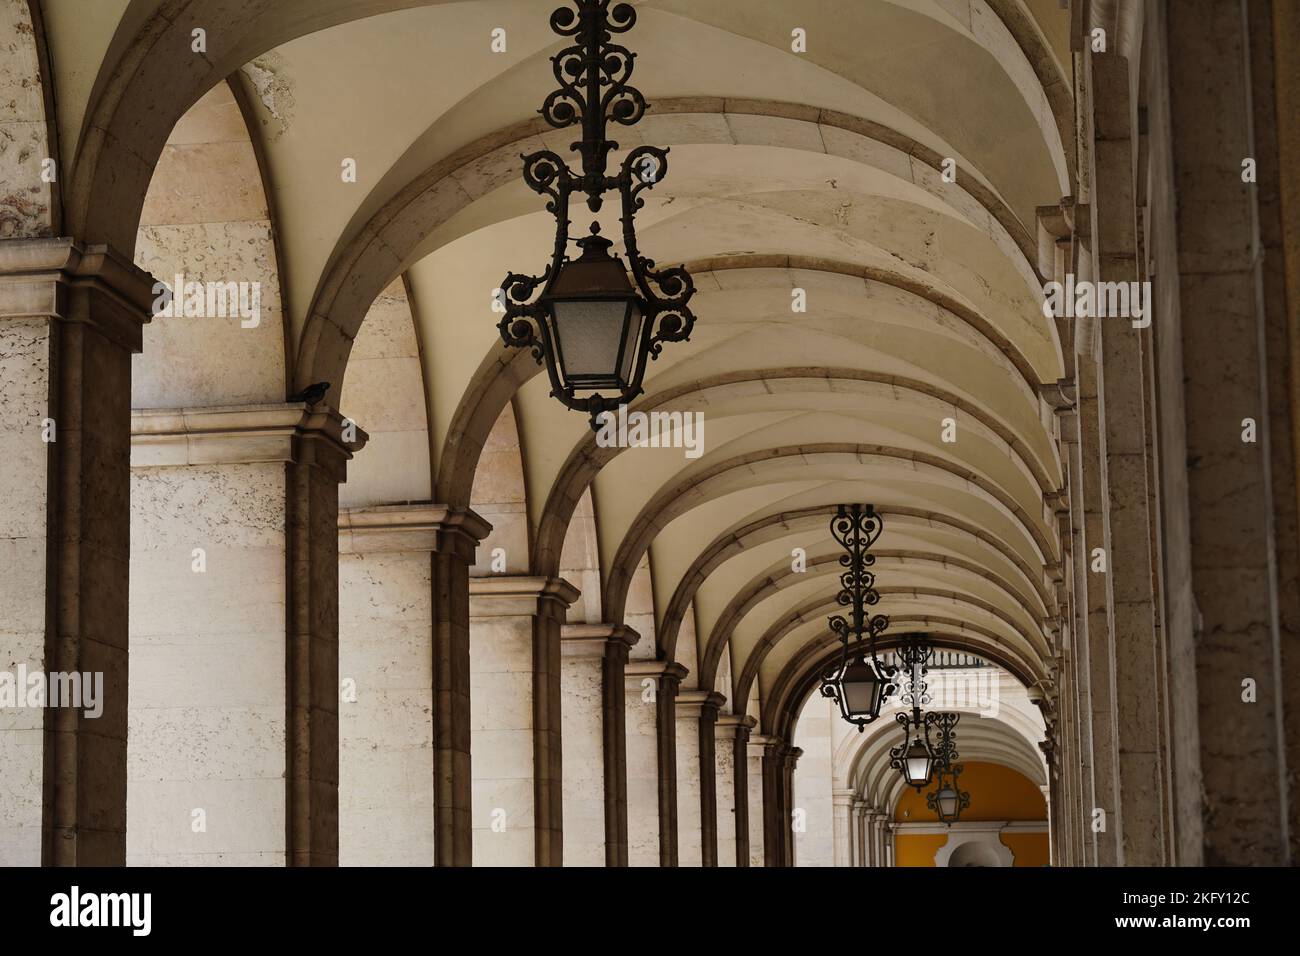 Passageway with arches forming a vaulted ceiling, with vanishing point in architecture Stock Photo